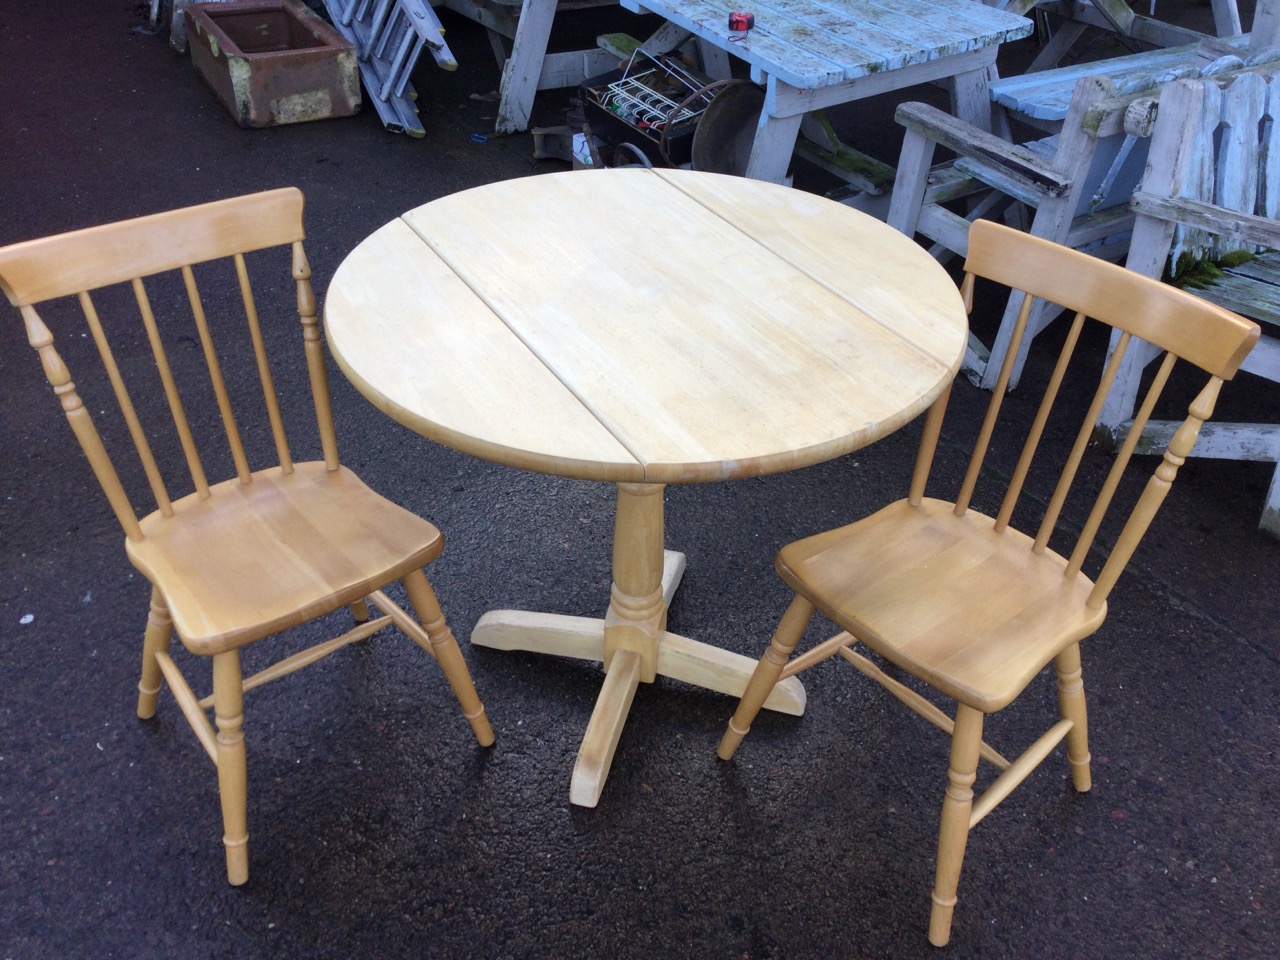 A circular hardwood table and two spindleback chairs, the table with drop leaves, the chairs in